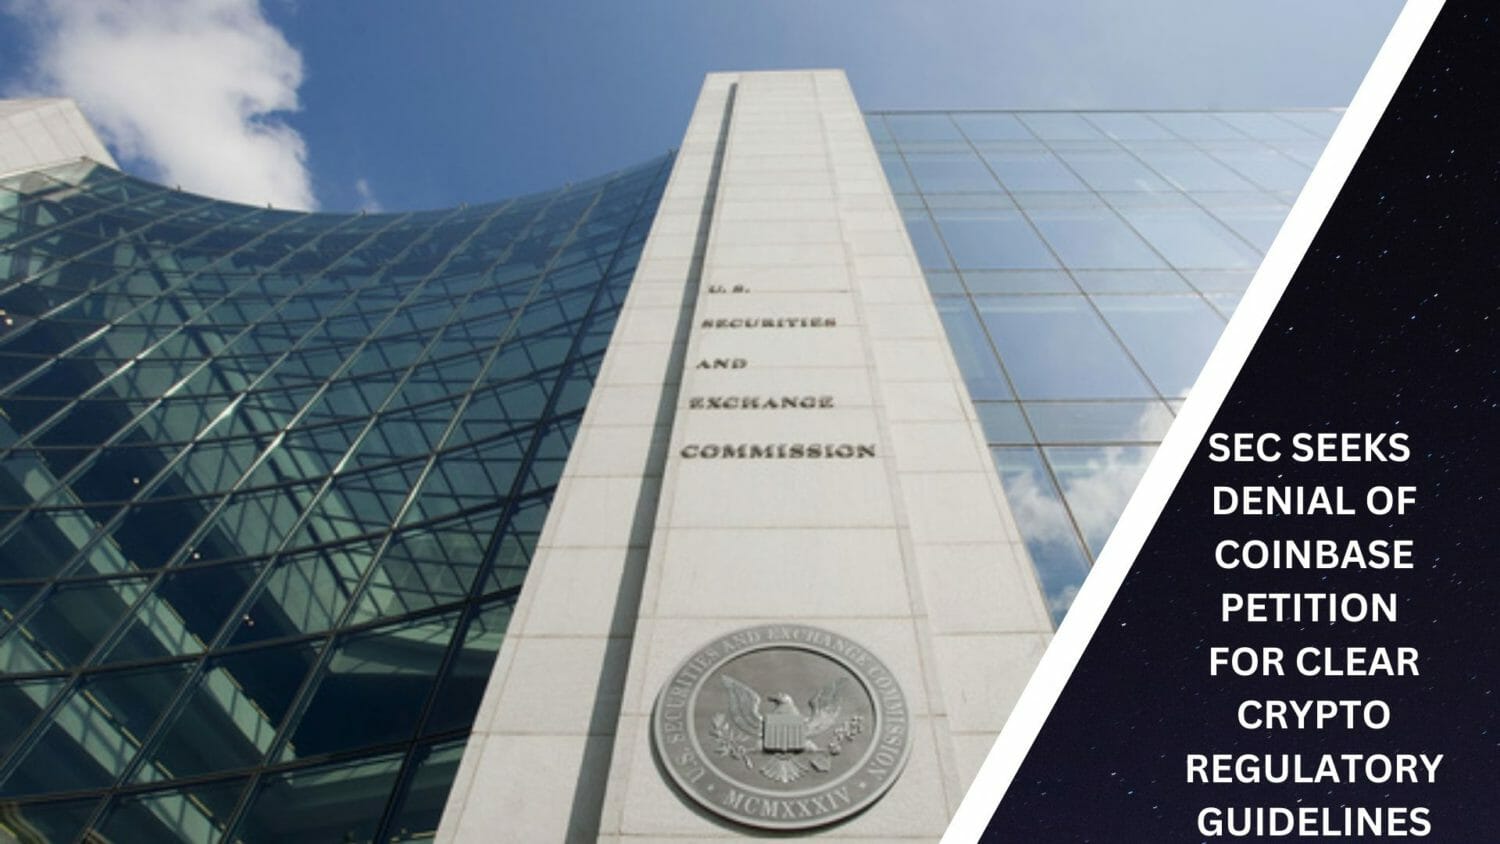 Sec Seeks Denial Of Coinbase Petition For Clear Crypto Regulatory Guidelines